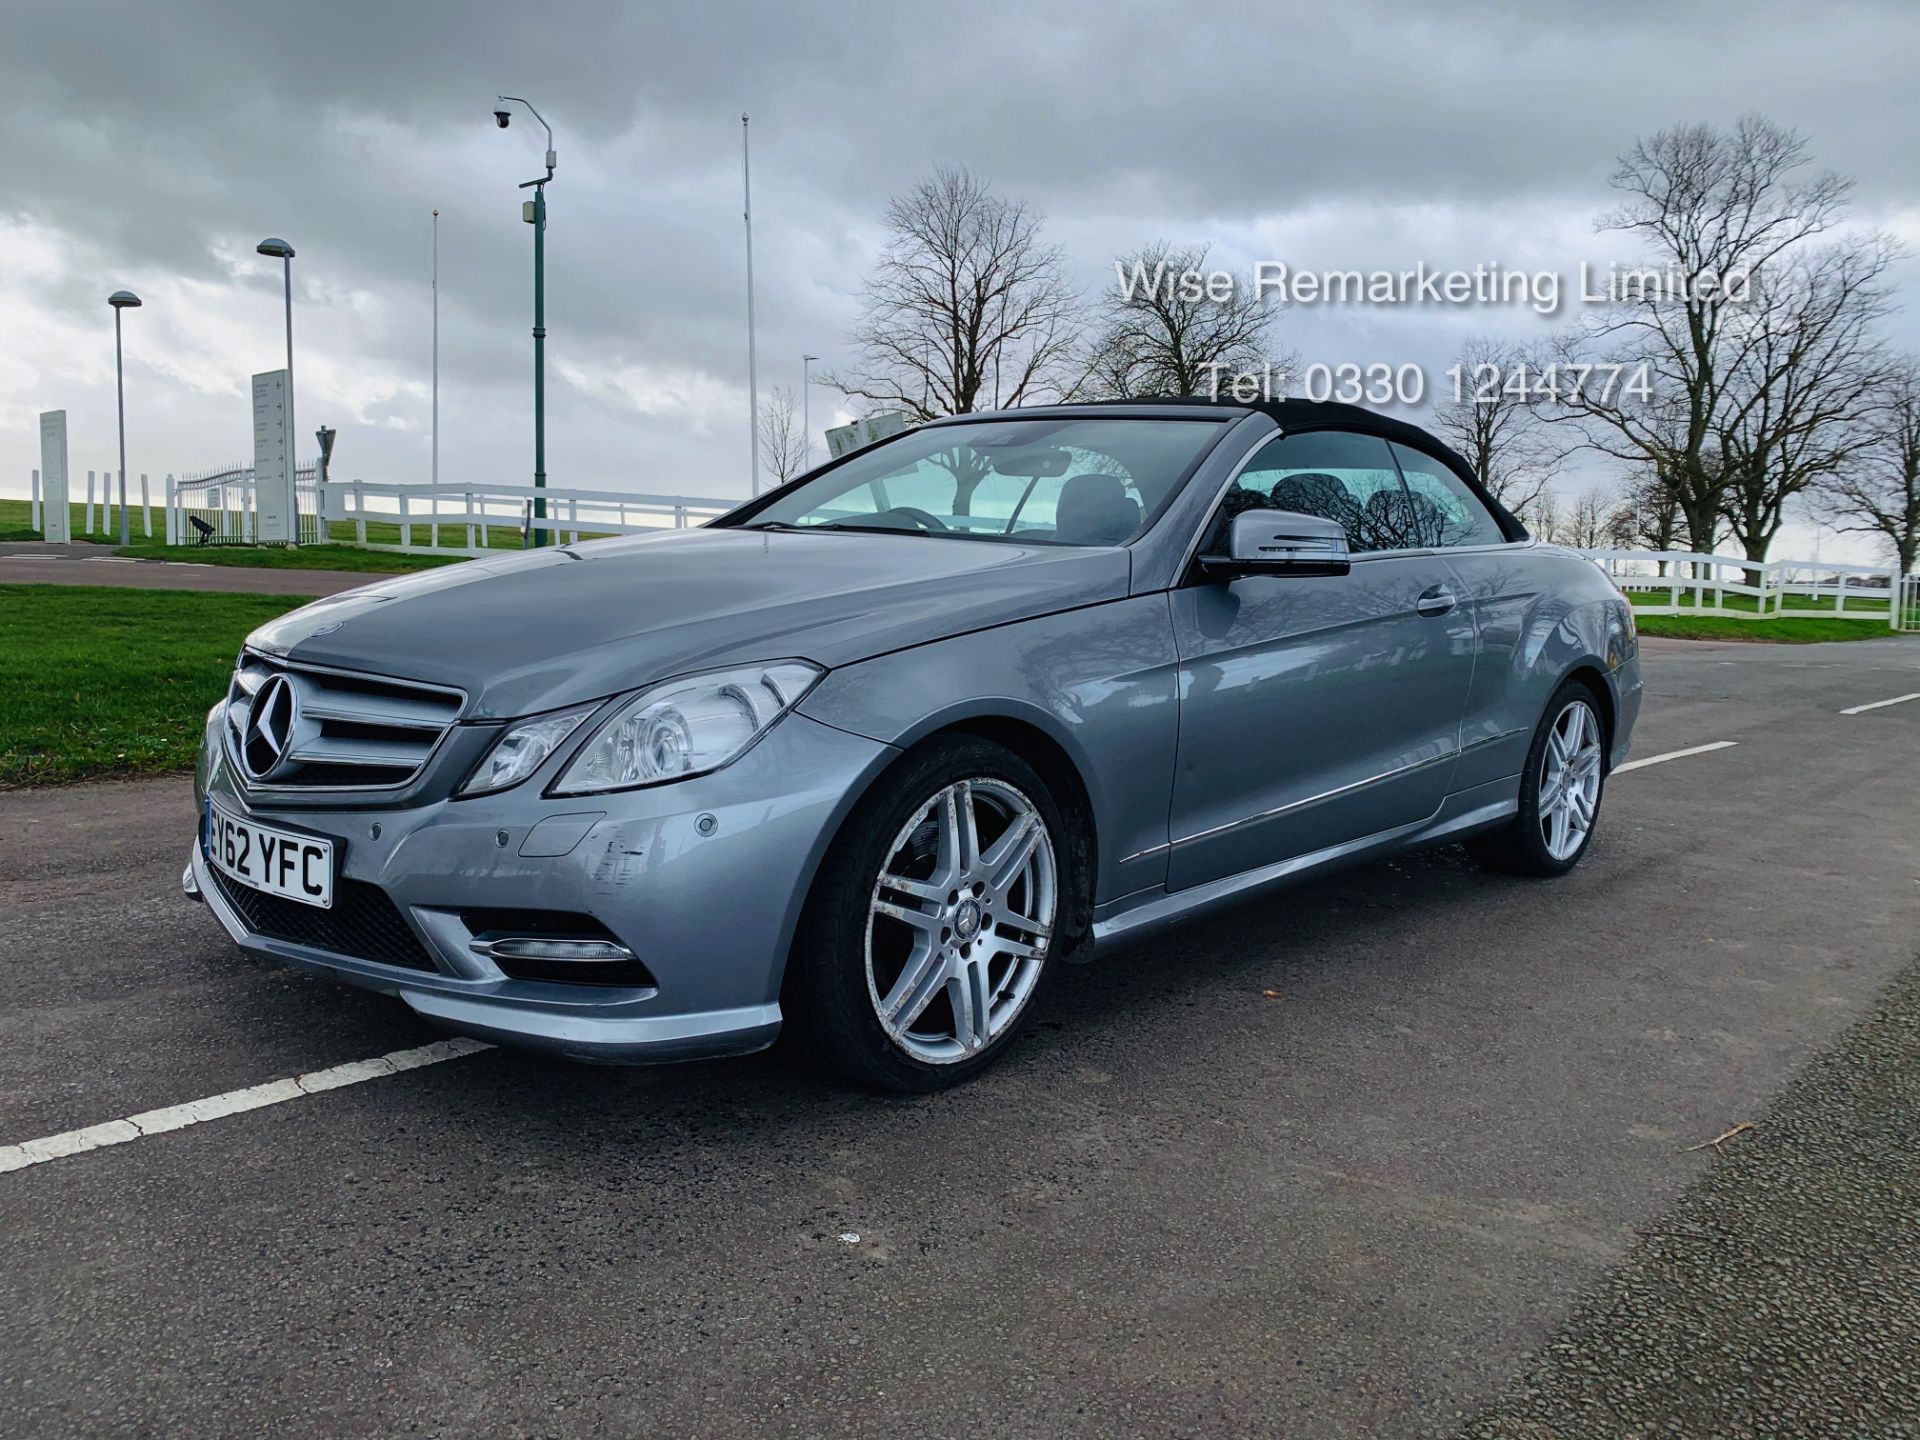 Mercedes E250 CDI Convertible Sport Tip Auto - 2013 Model - Service History - Leather - Parking aid